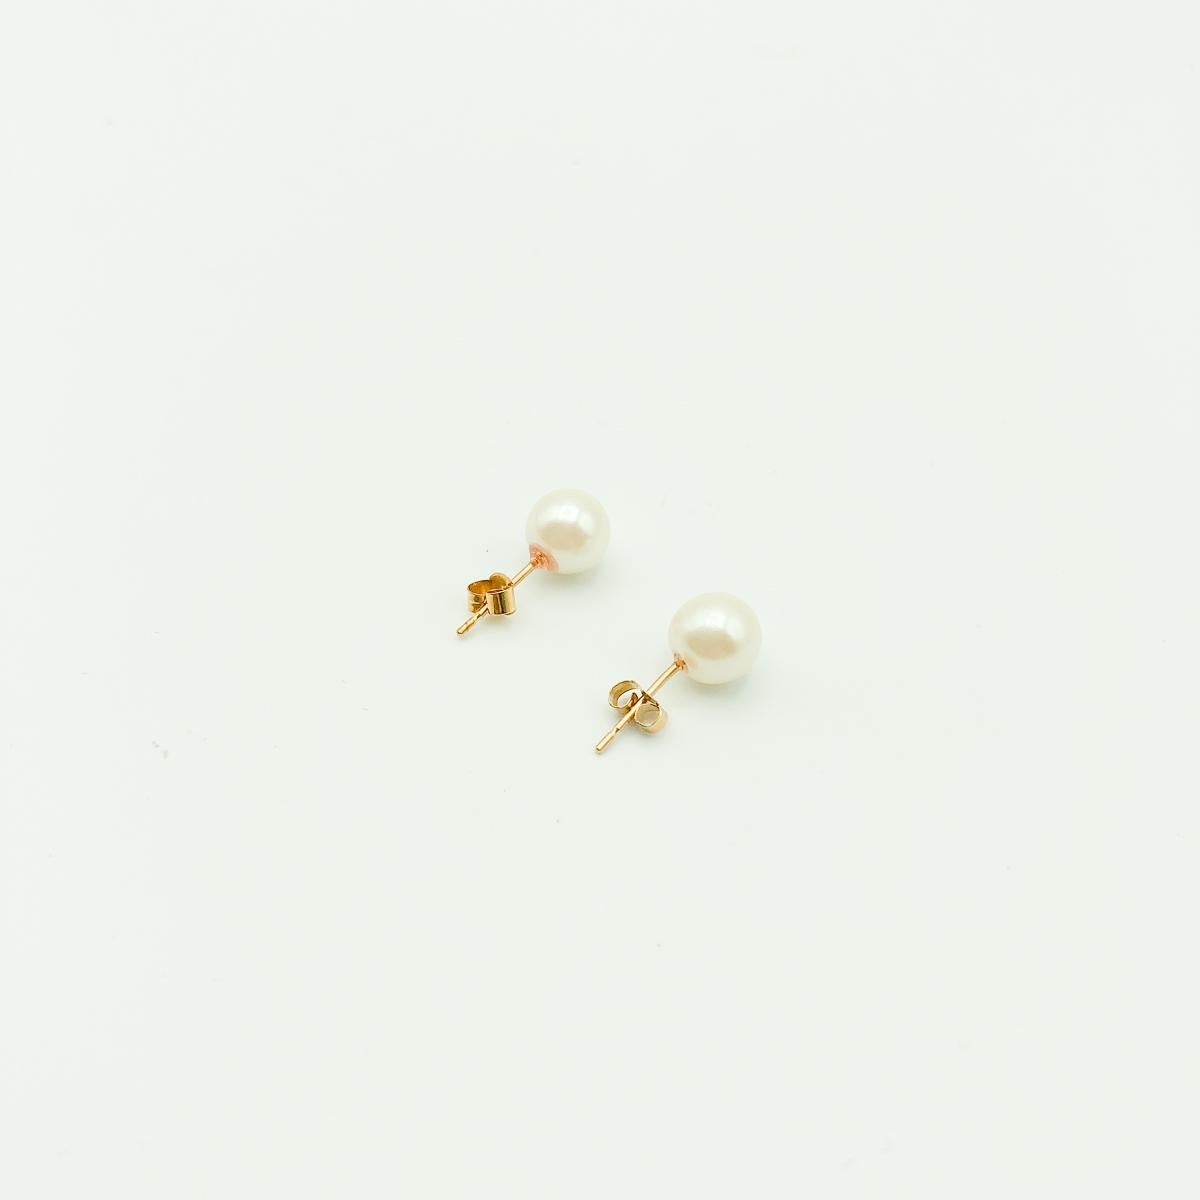 Vintage 9ct Gold Cultured Pearl Stud Earrings 1980s In Good Condition For Sale In Wilmslow, GB